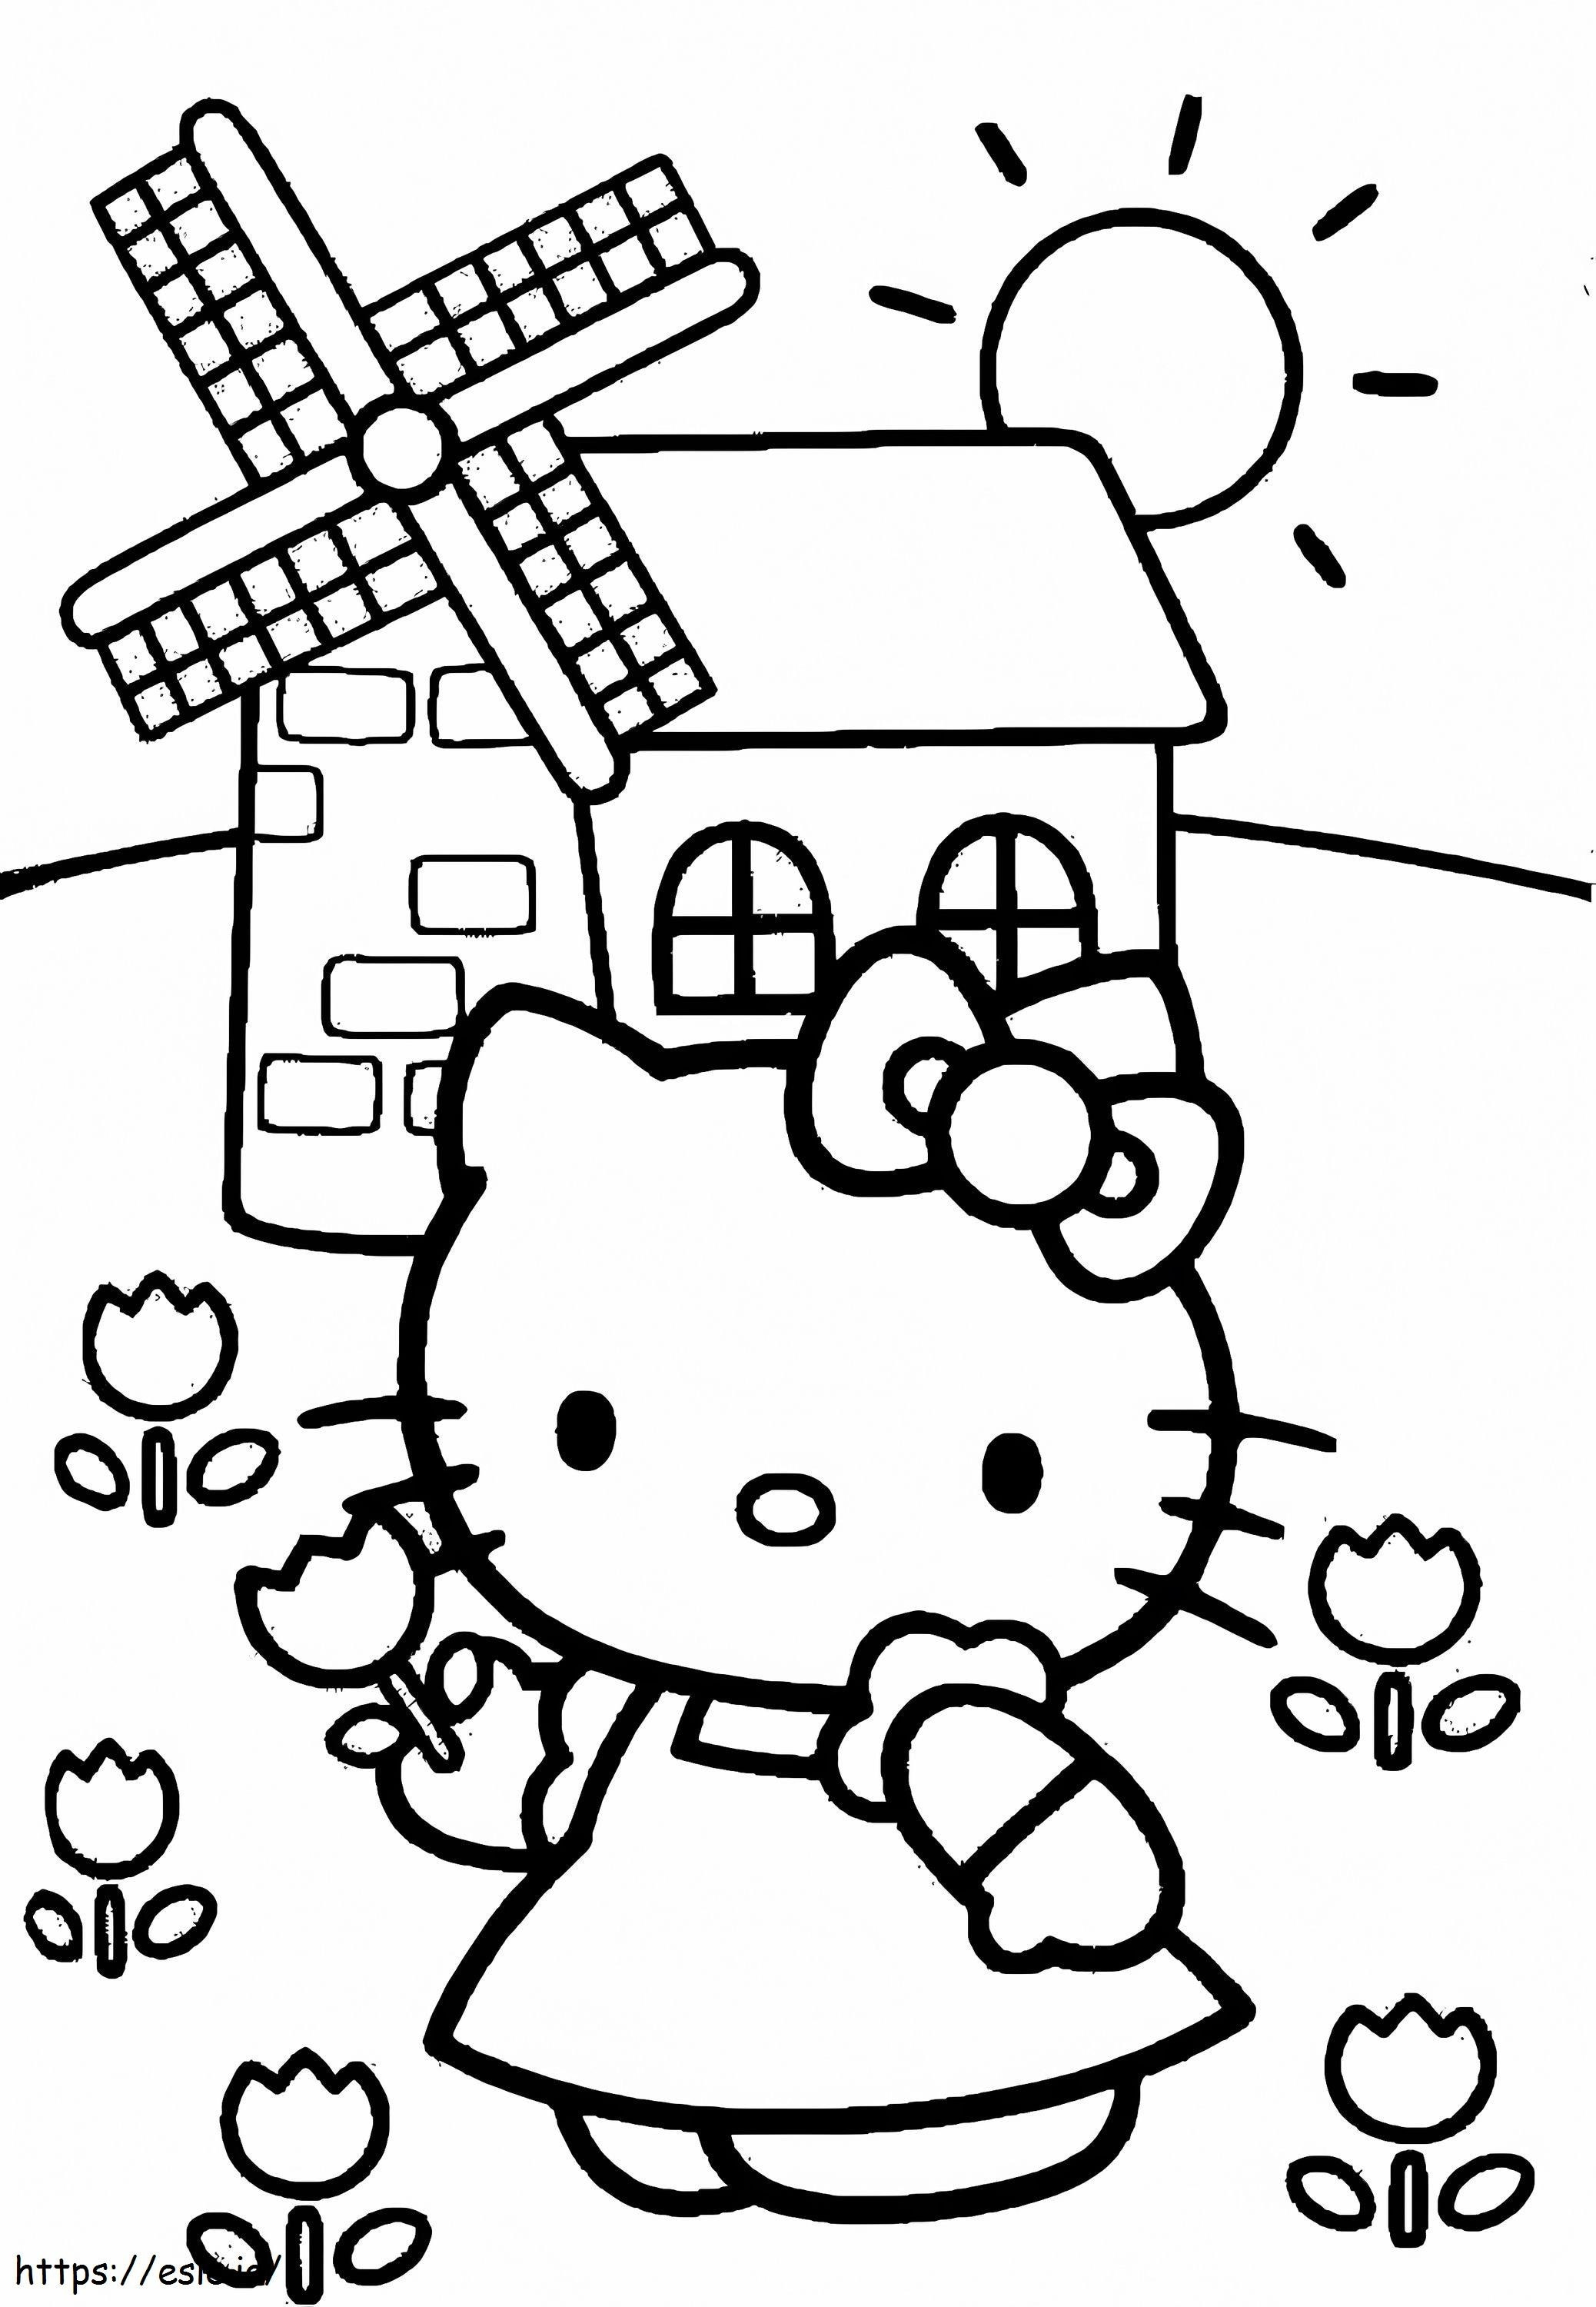 Hello Kitty In The Flower Garden coloring page